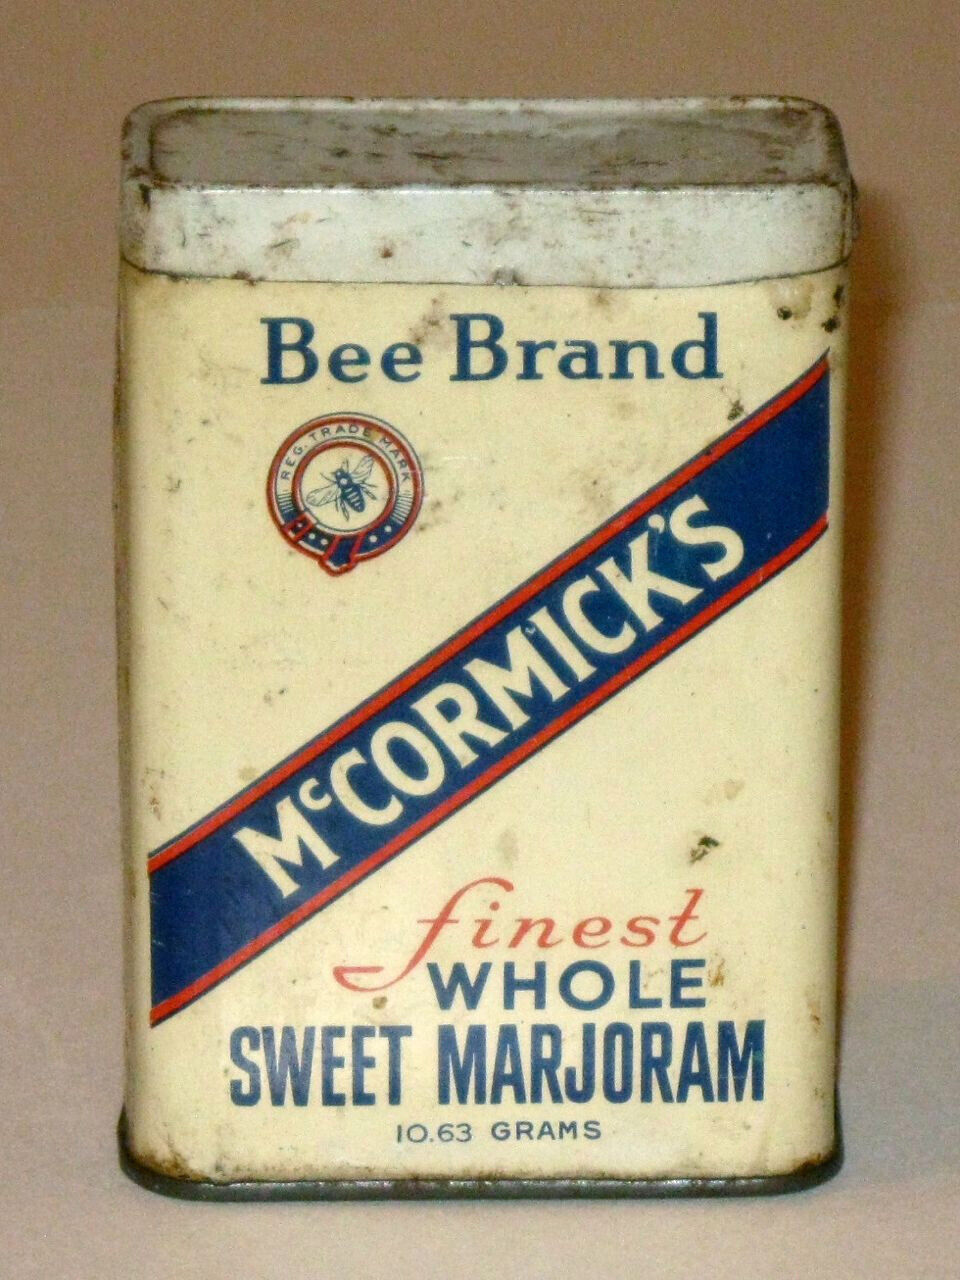 Antique 1936 McCORMICK\'s Bee Brand WHOLE SWEET MARJORAM Advertising Tin w Spice